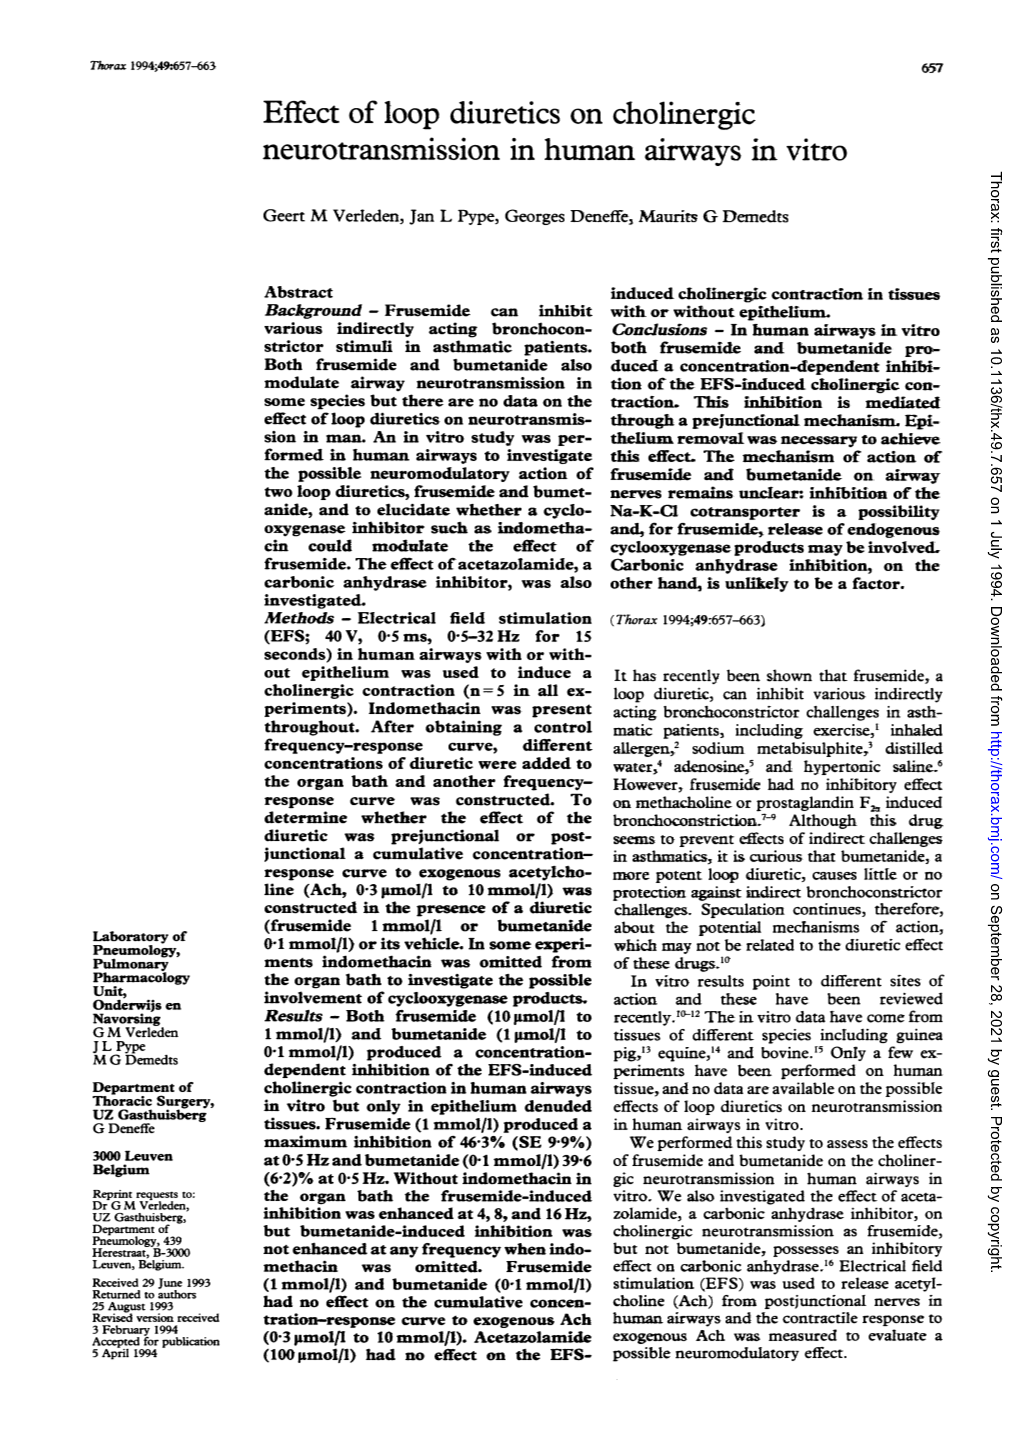 Effect of Loop Diuretics on Cholinergic Neurotransmission in Human Airways in Vitro Thorax: First Published As 10.1136/Thx.49.7.657 on 1 July 1994